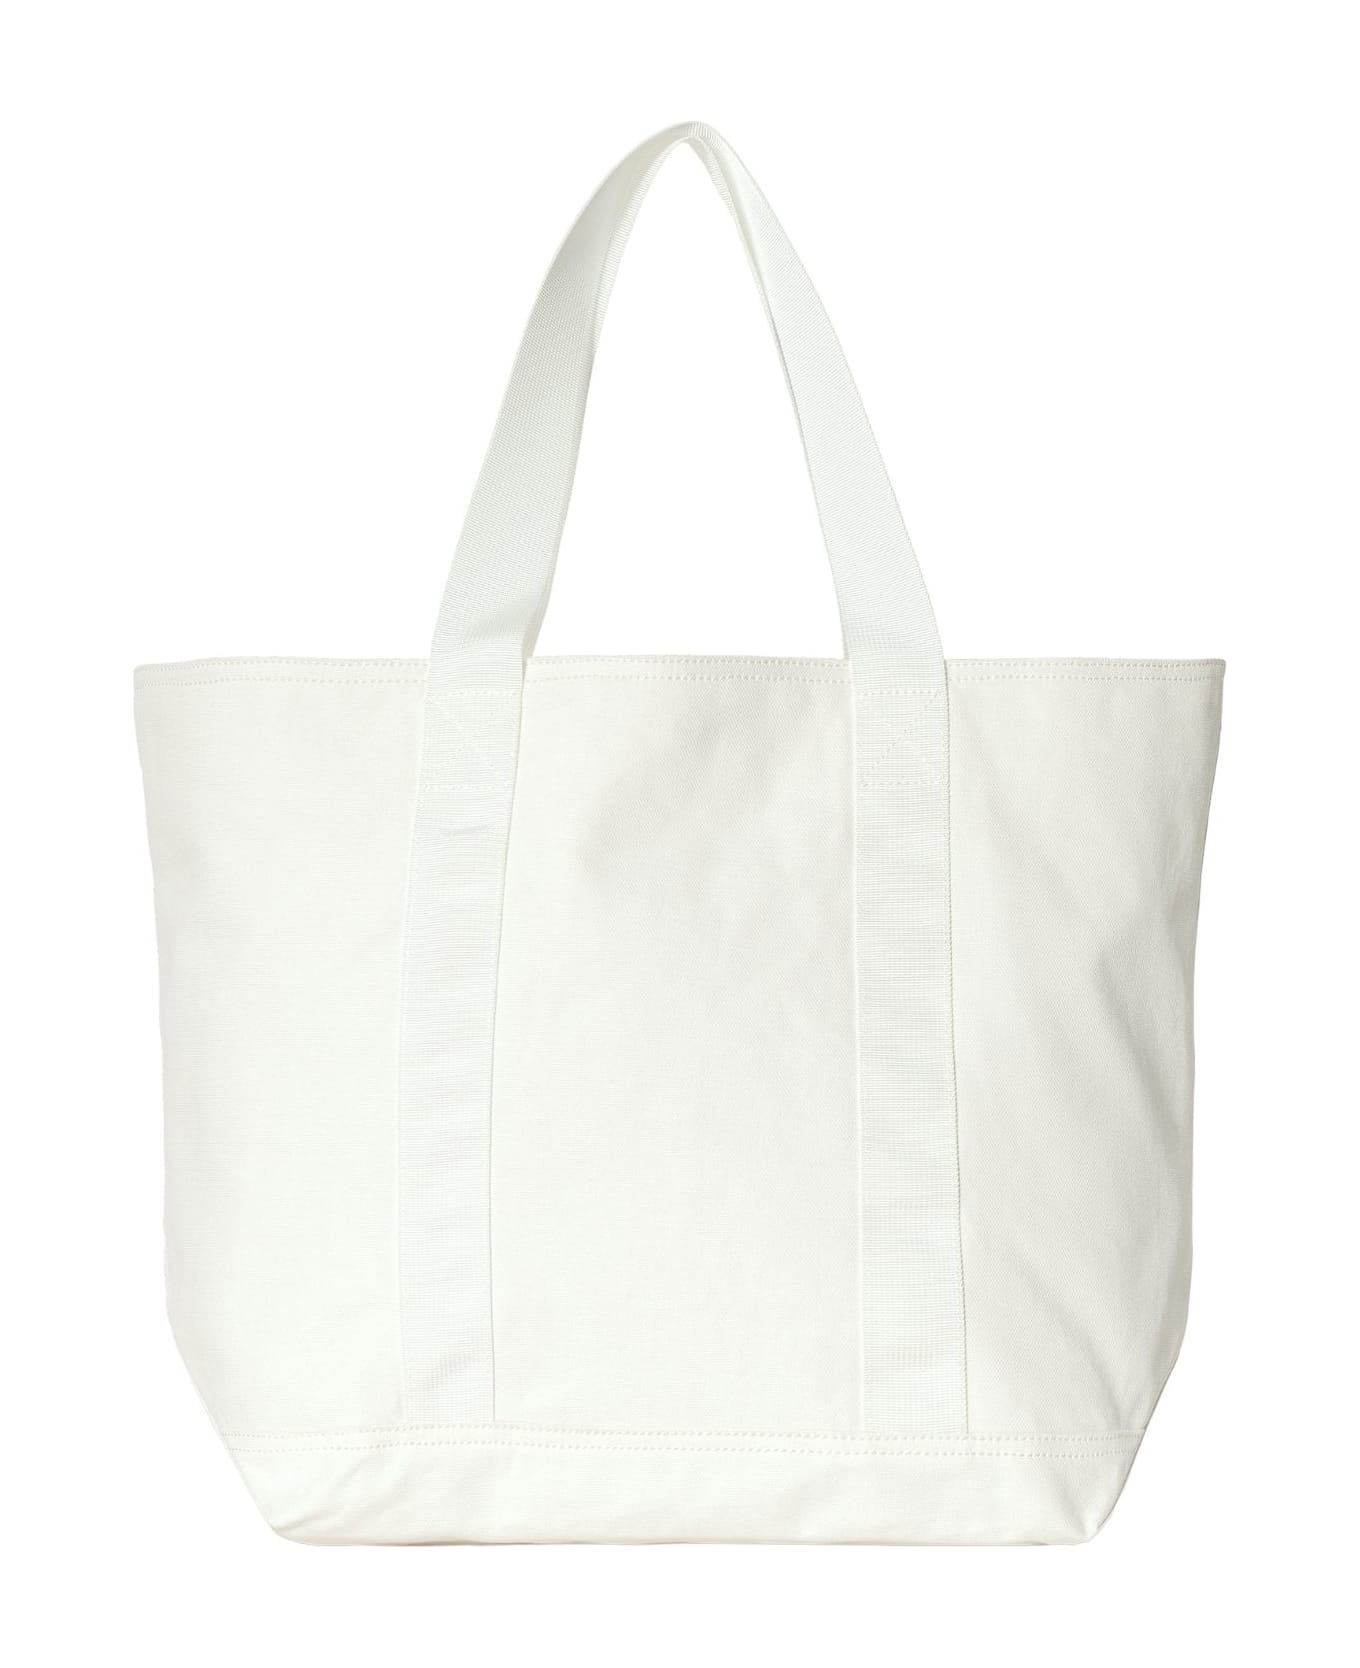 Carhartt Canvas Tote - Wax Rinsed トートバッグ